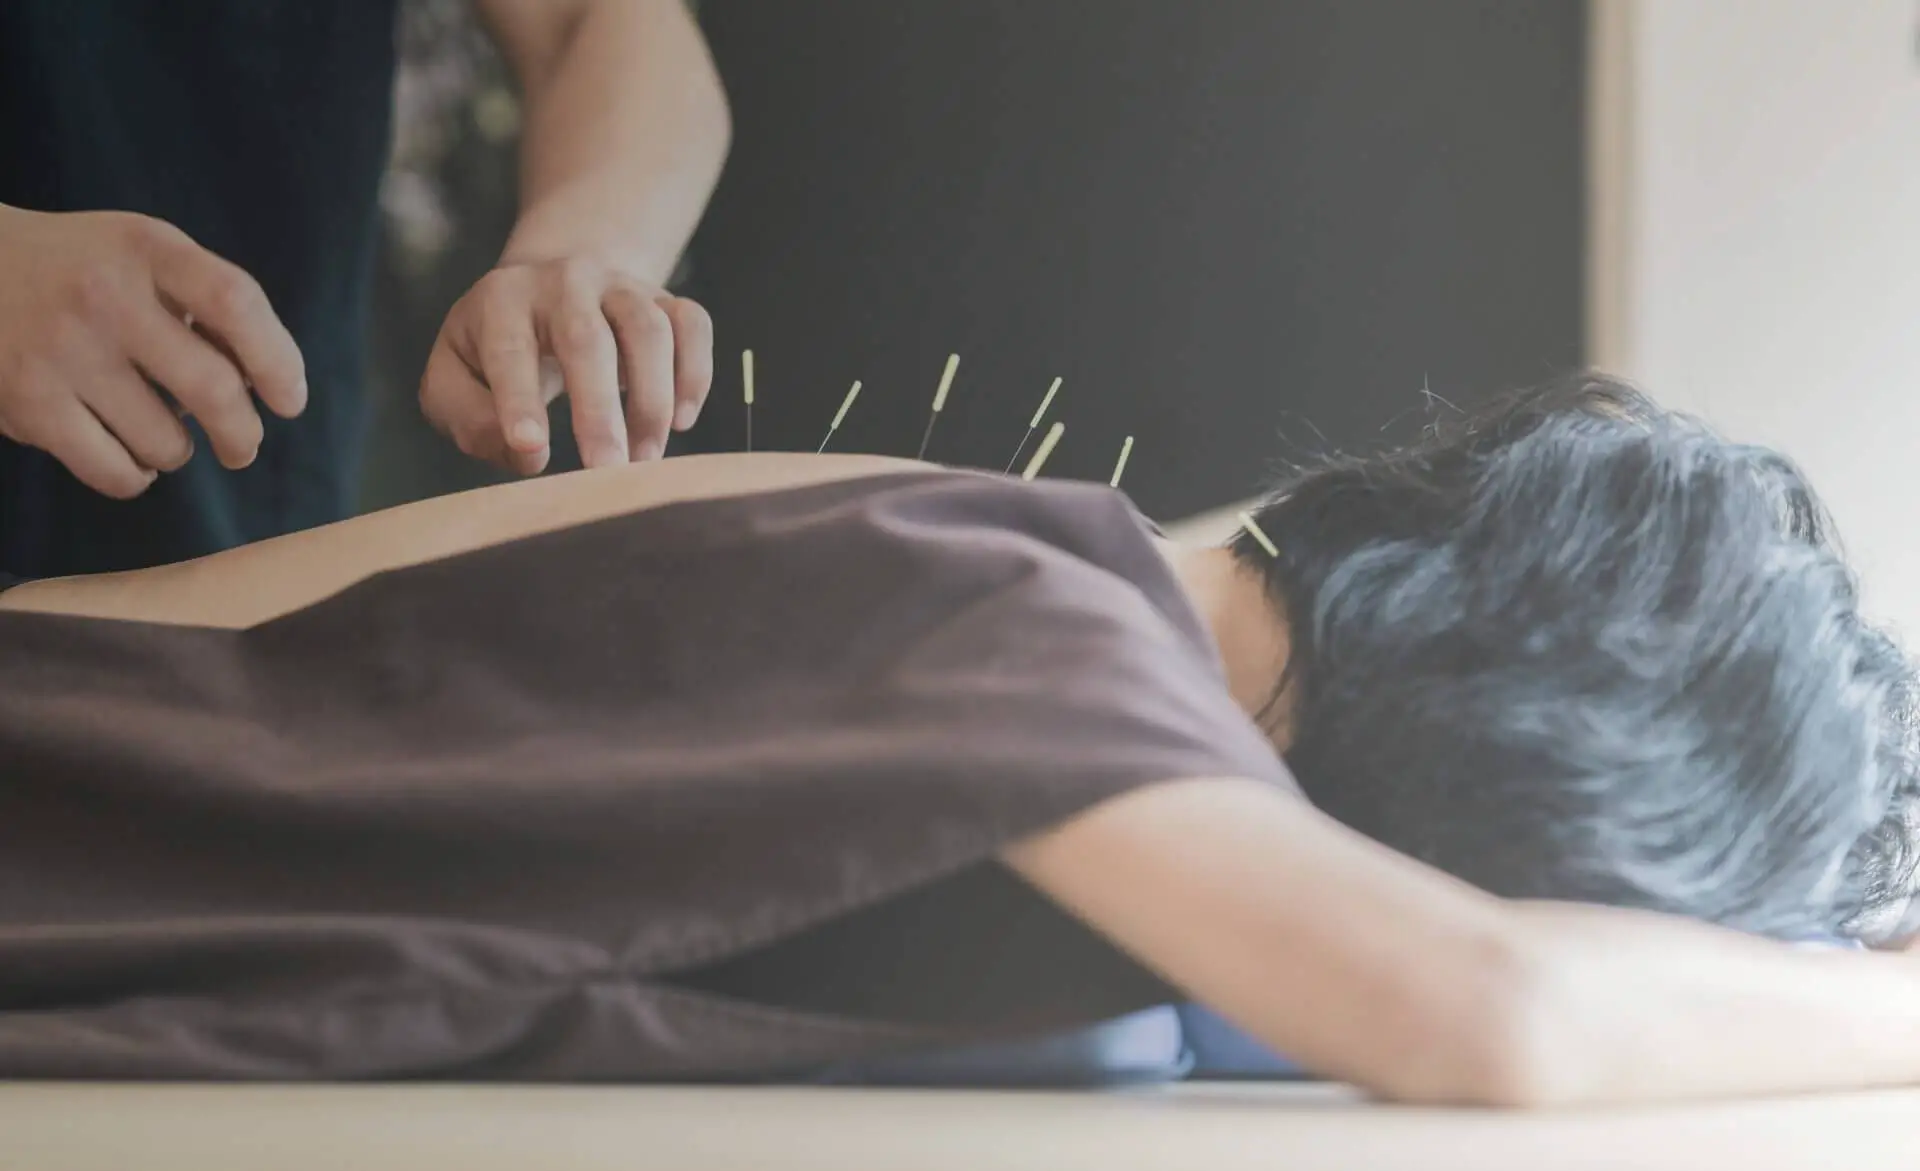 Does Medicare Cover Acupuncture?